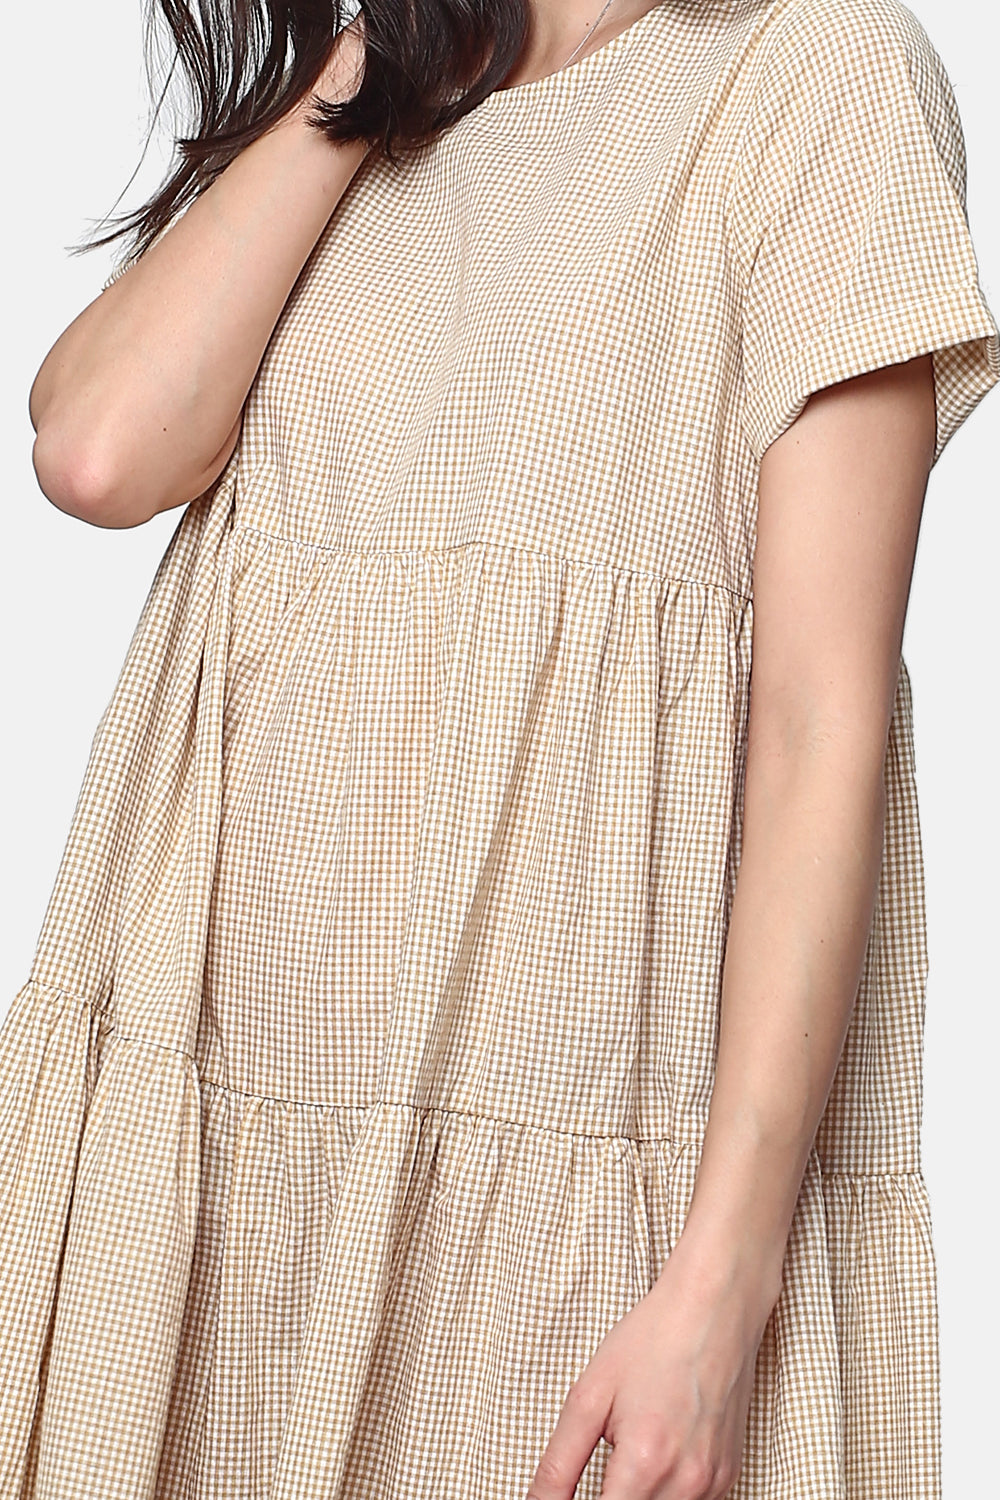 Babydoll cut gingham dress, closed back with mother-of-pearl buttons, short sleeves